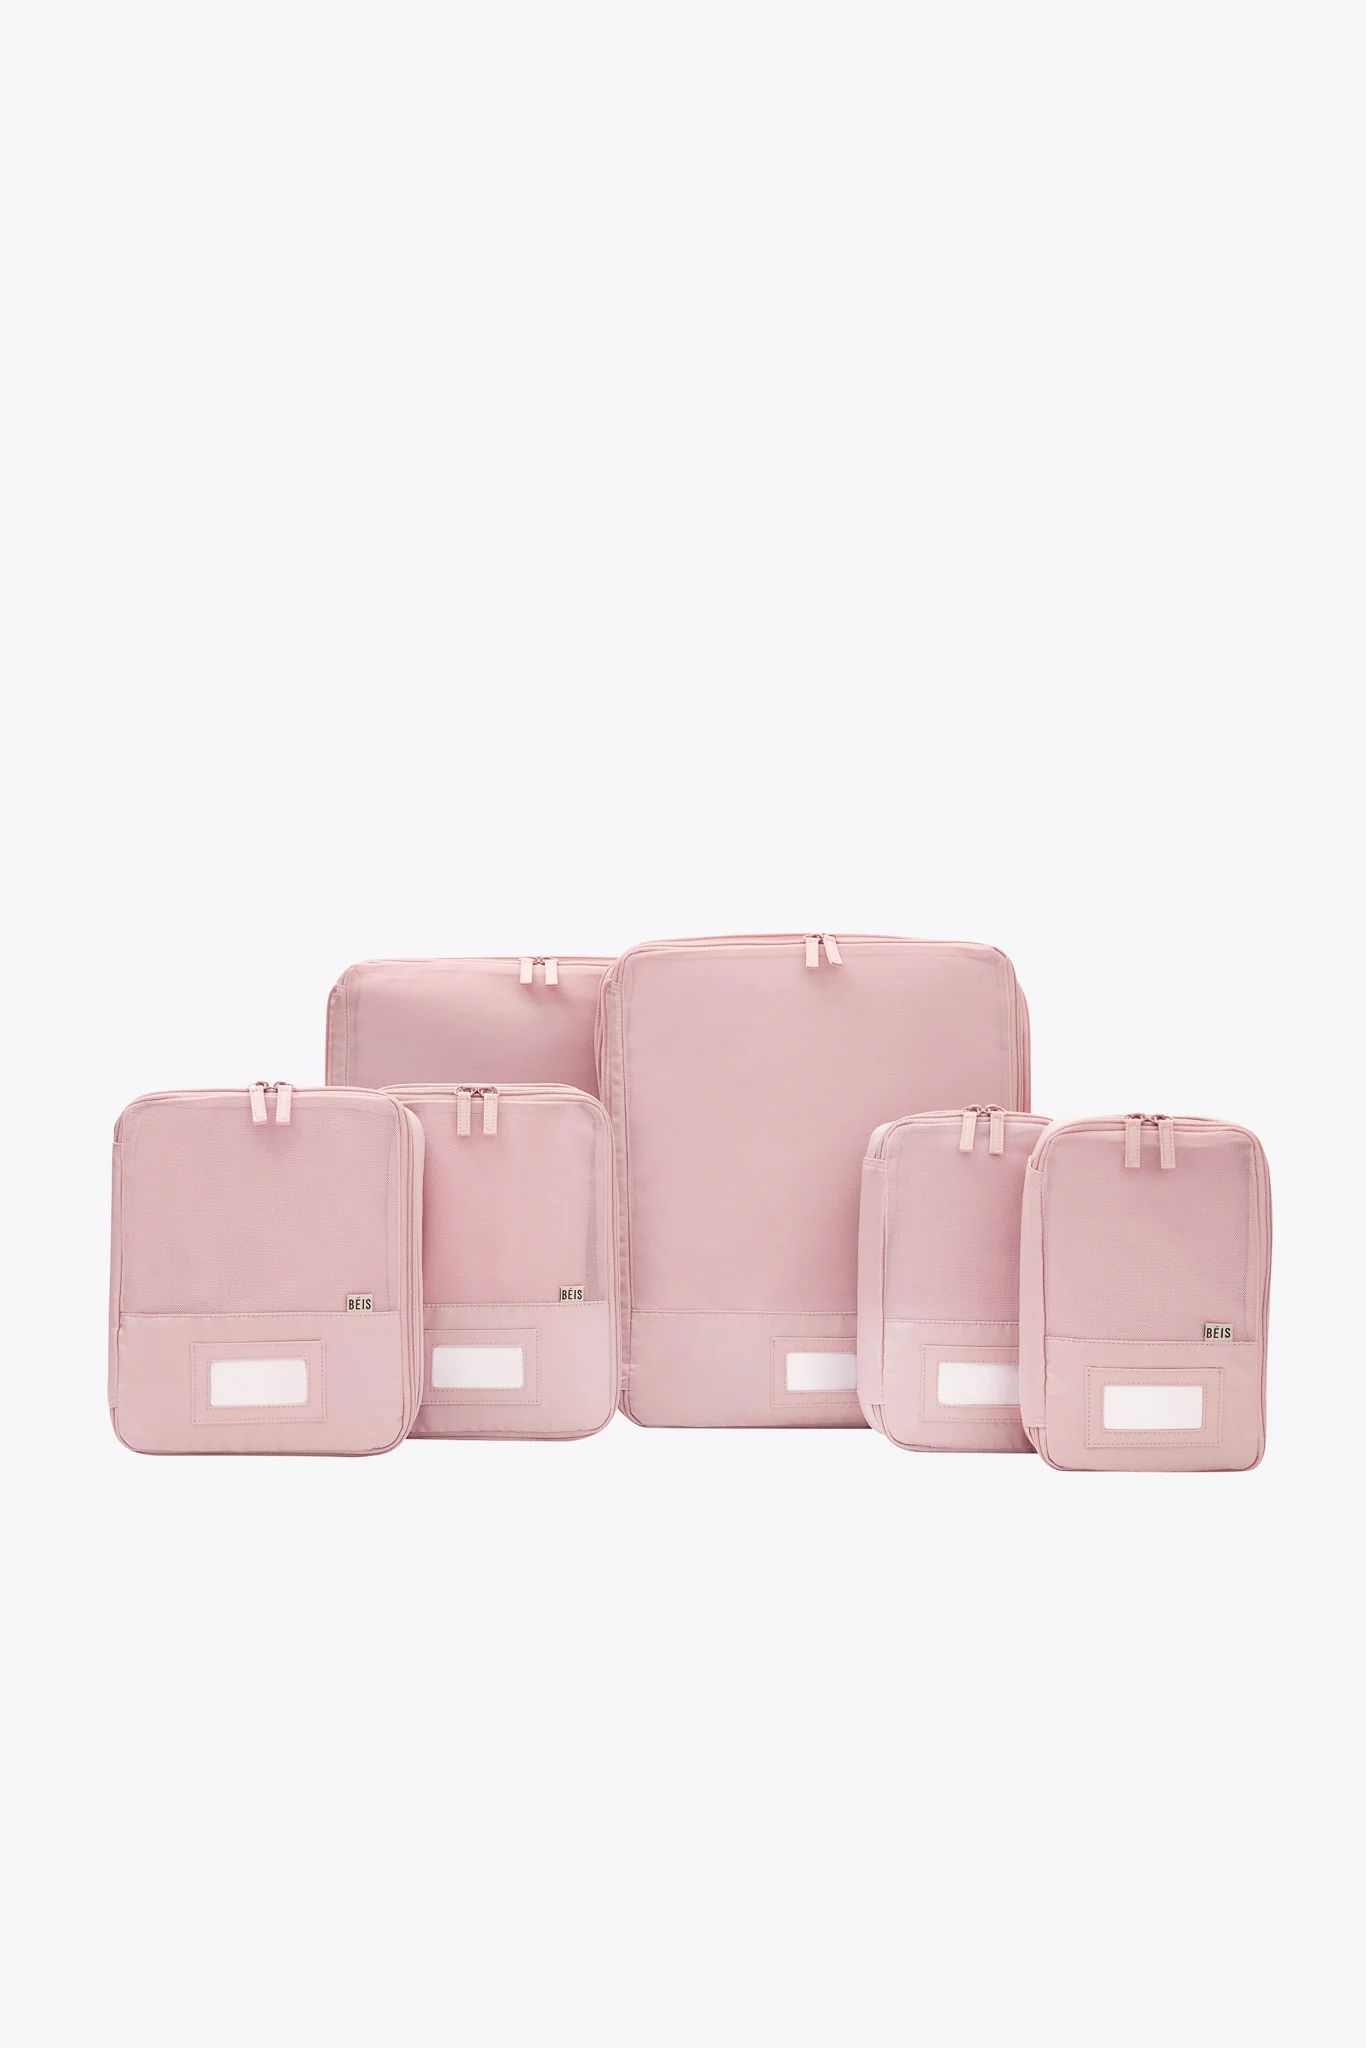 BÉIS 'The Compression Packing Cubes 6 pc' in Atlas Pink - 6 Piece Set Of Packing Compression Bag... | BÉIS Travel